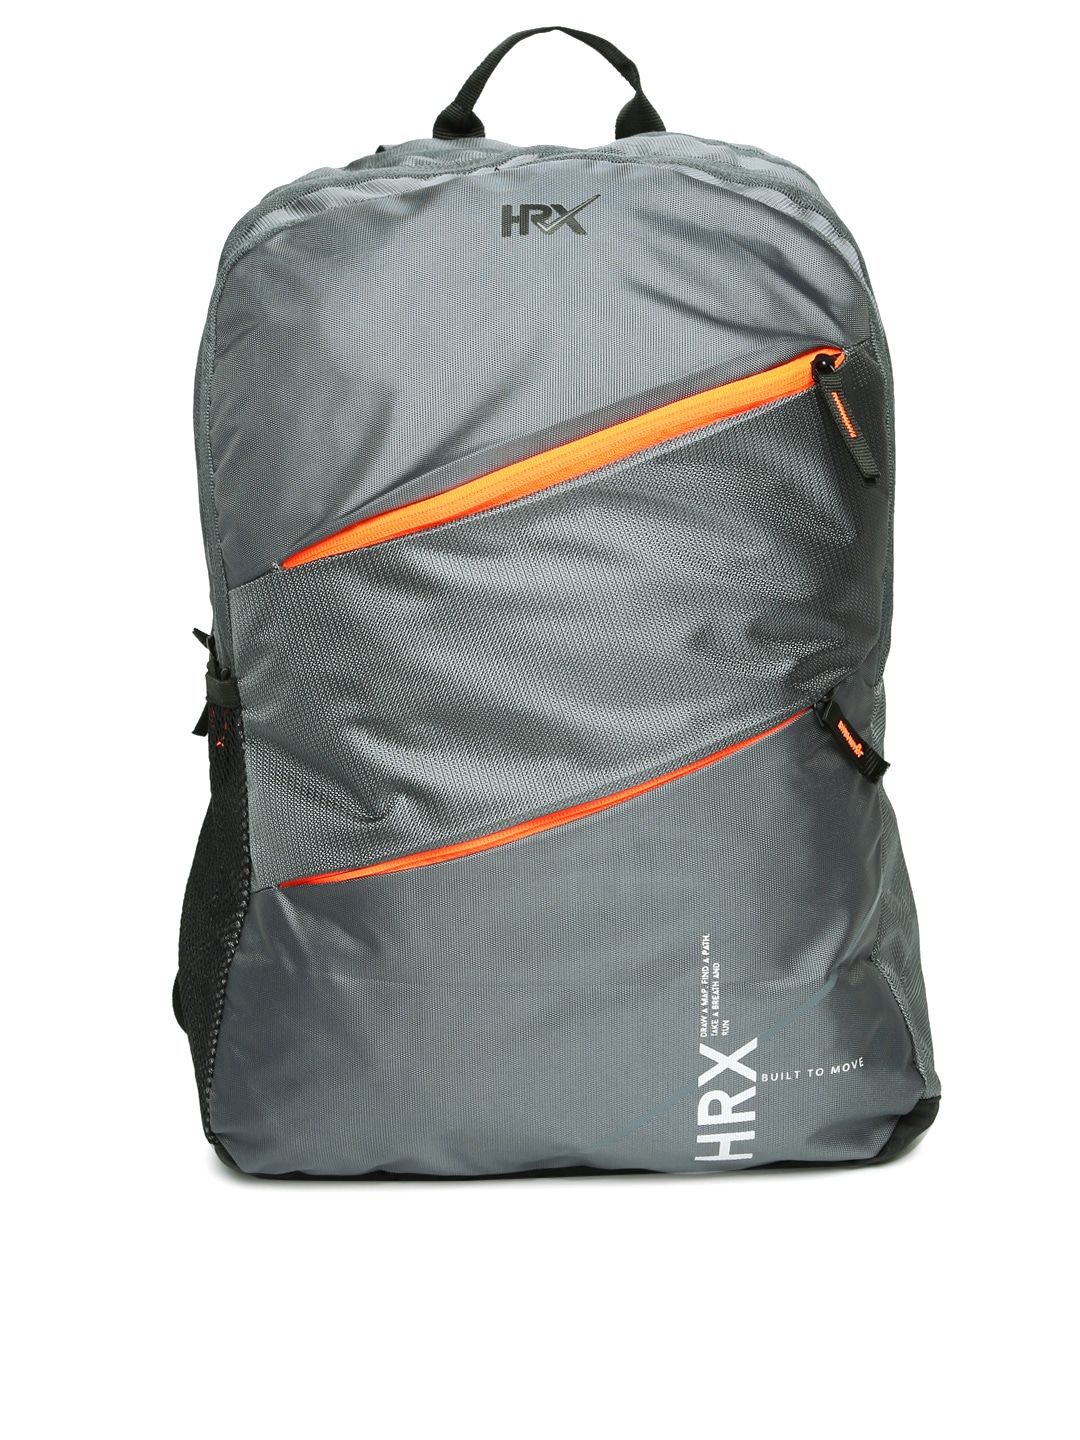 Accessories Backpacks | HRX by Hrithik Roshan Unisex Grey Solid Multiutility Laptop Backpack - RS78599